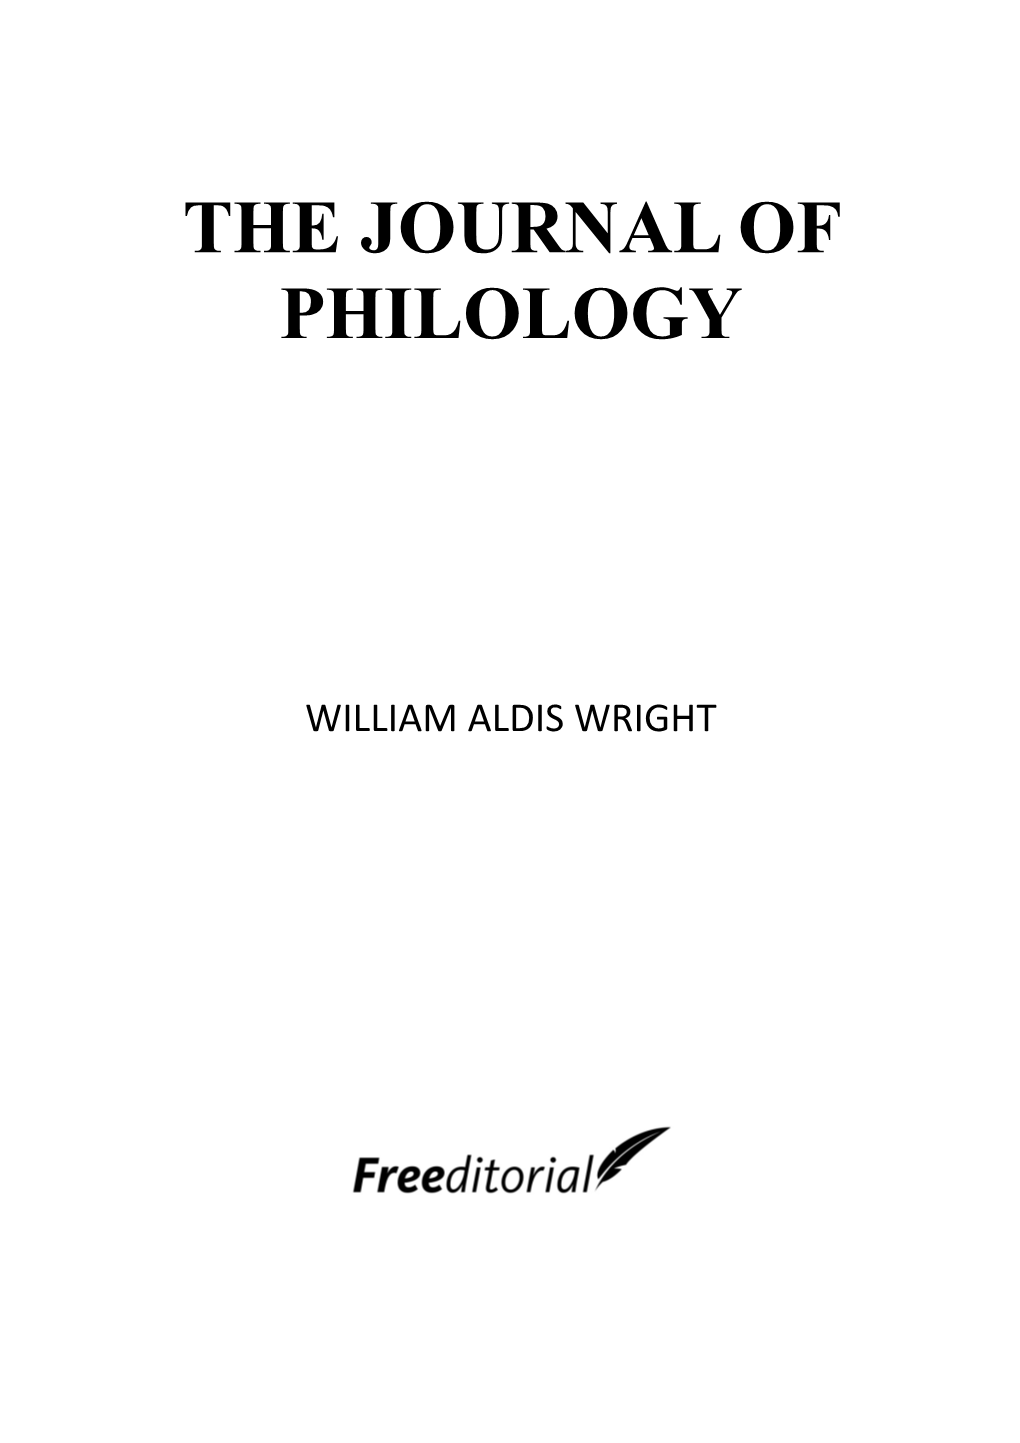 William Aldis Wright,The Journal of Philology